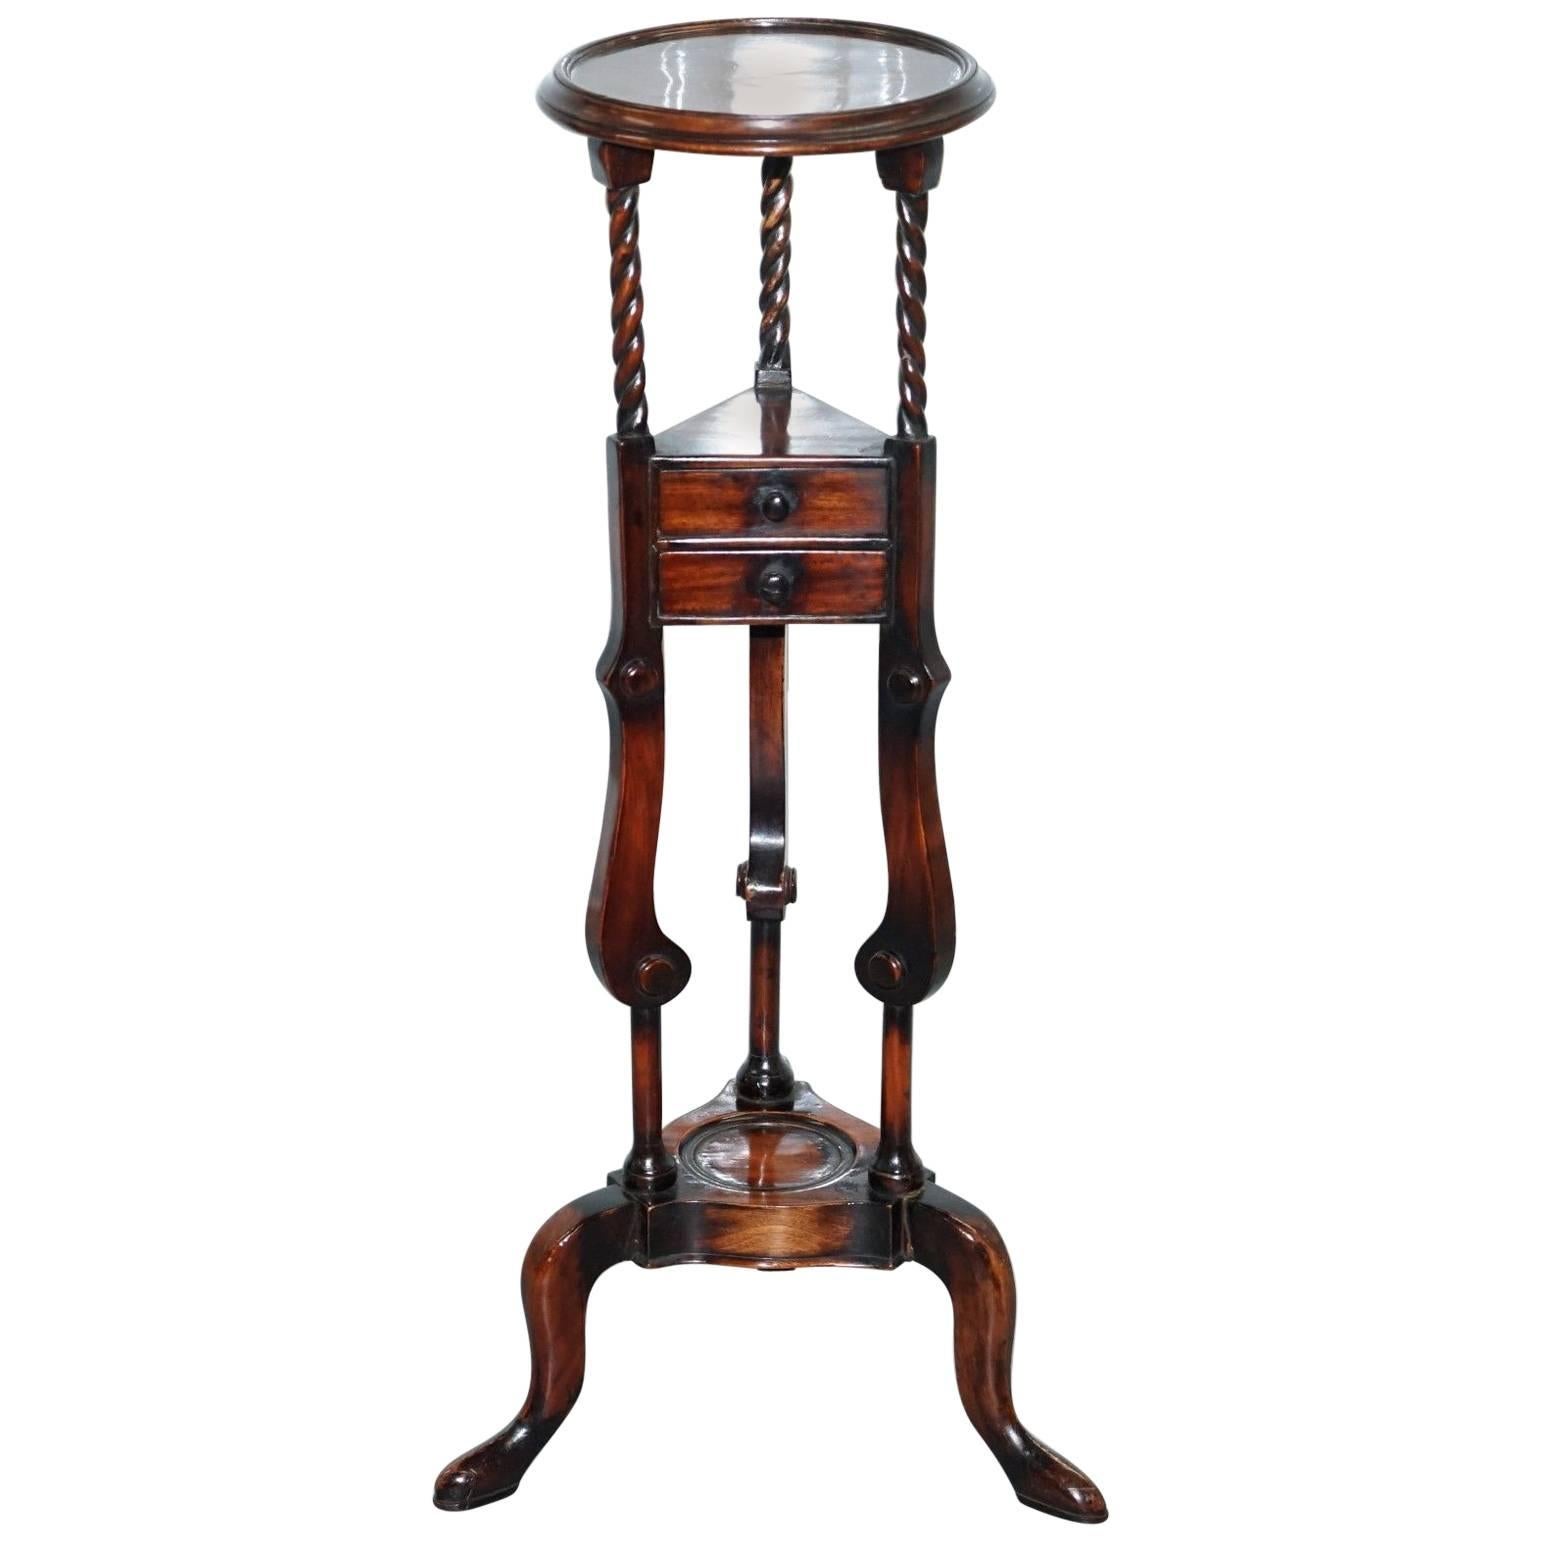 1 of 2 George III Style Mahogany Jardinière Display Stands with Two Faux Drawers